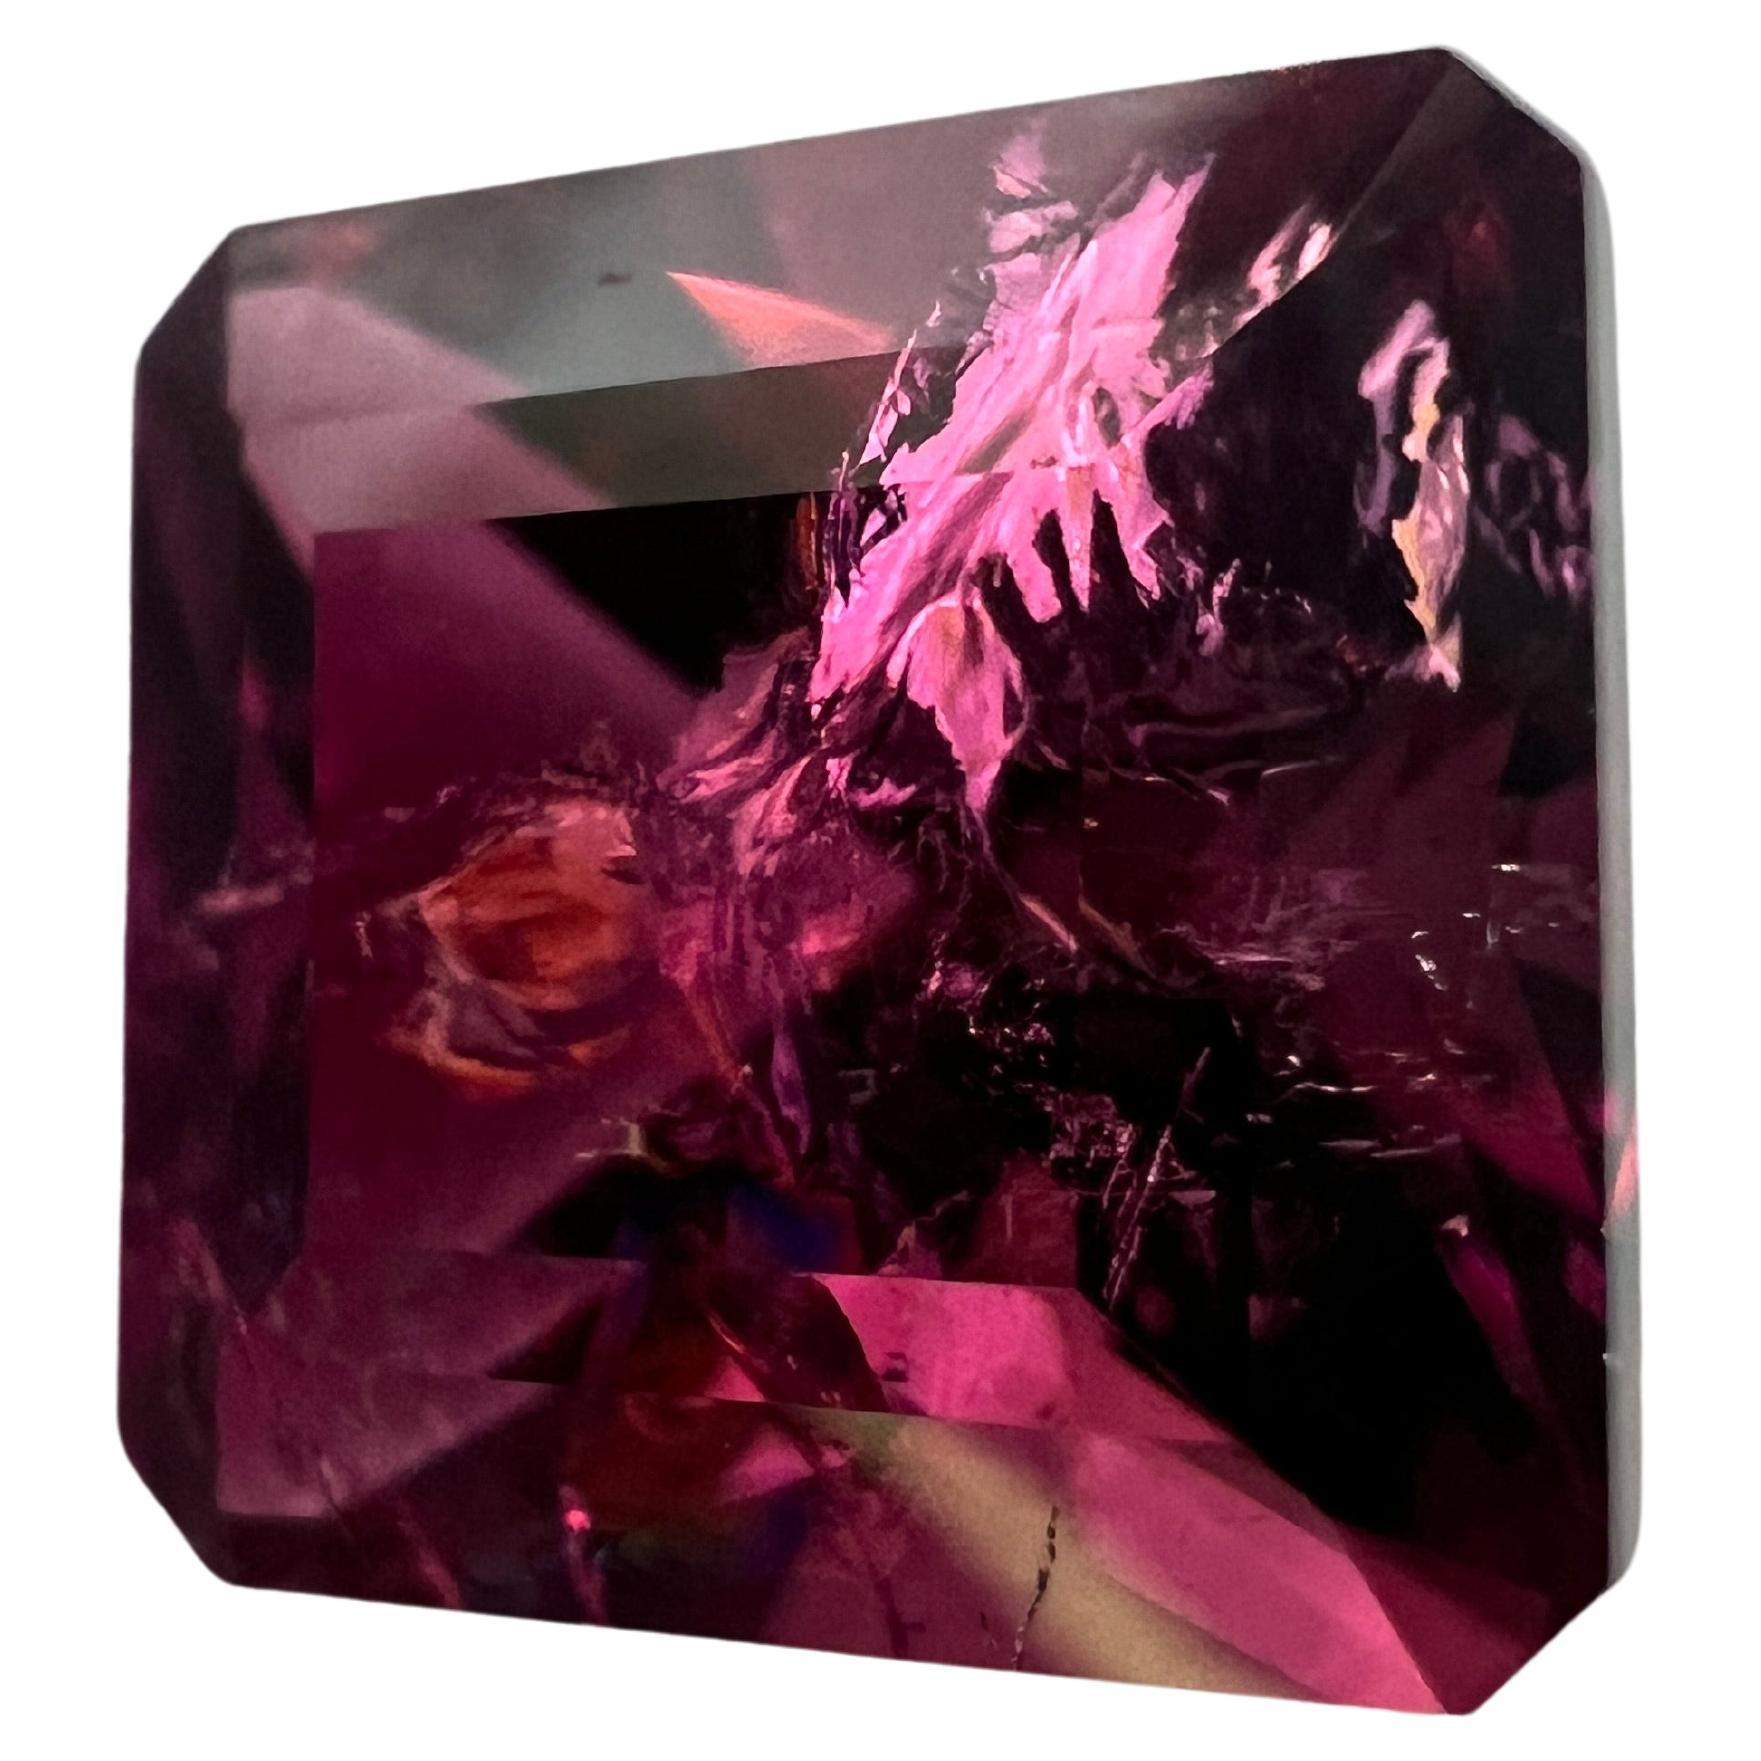 Our 8.75ct Pink Asscher Rubellite is a treasure of unparalleled beauty. Expertly cut in the prestigious Asscher style, this gemstone boasts step-cut facets that draw the eye inward, enhancing the stone’s natural brilliance and rich pink hue.

Key